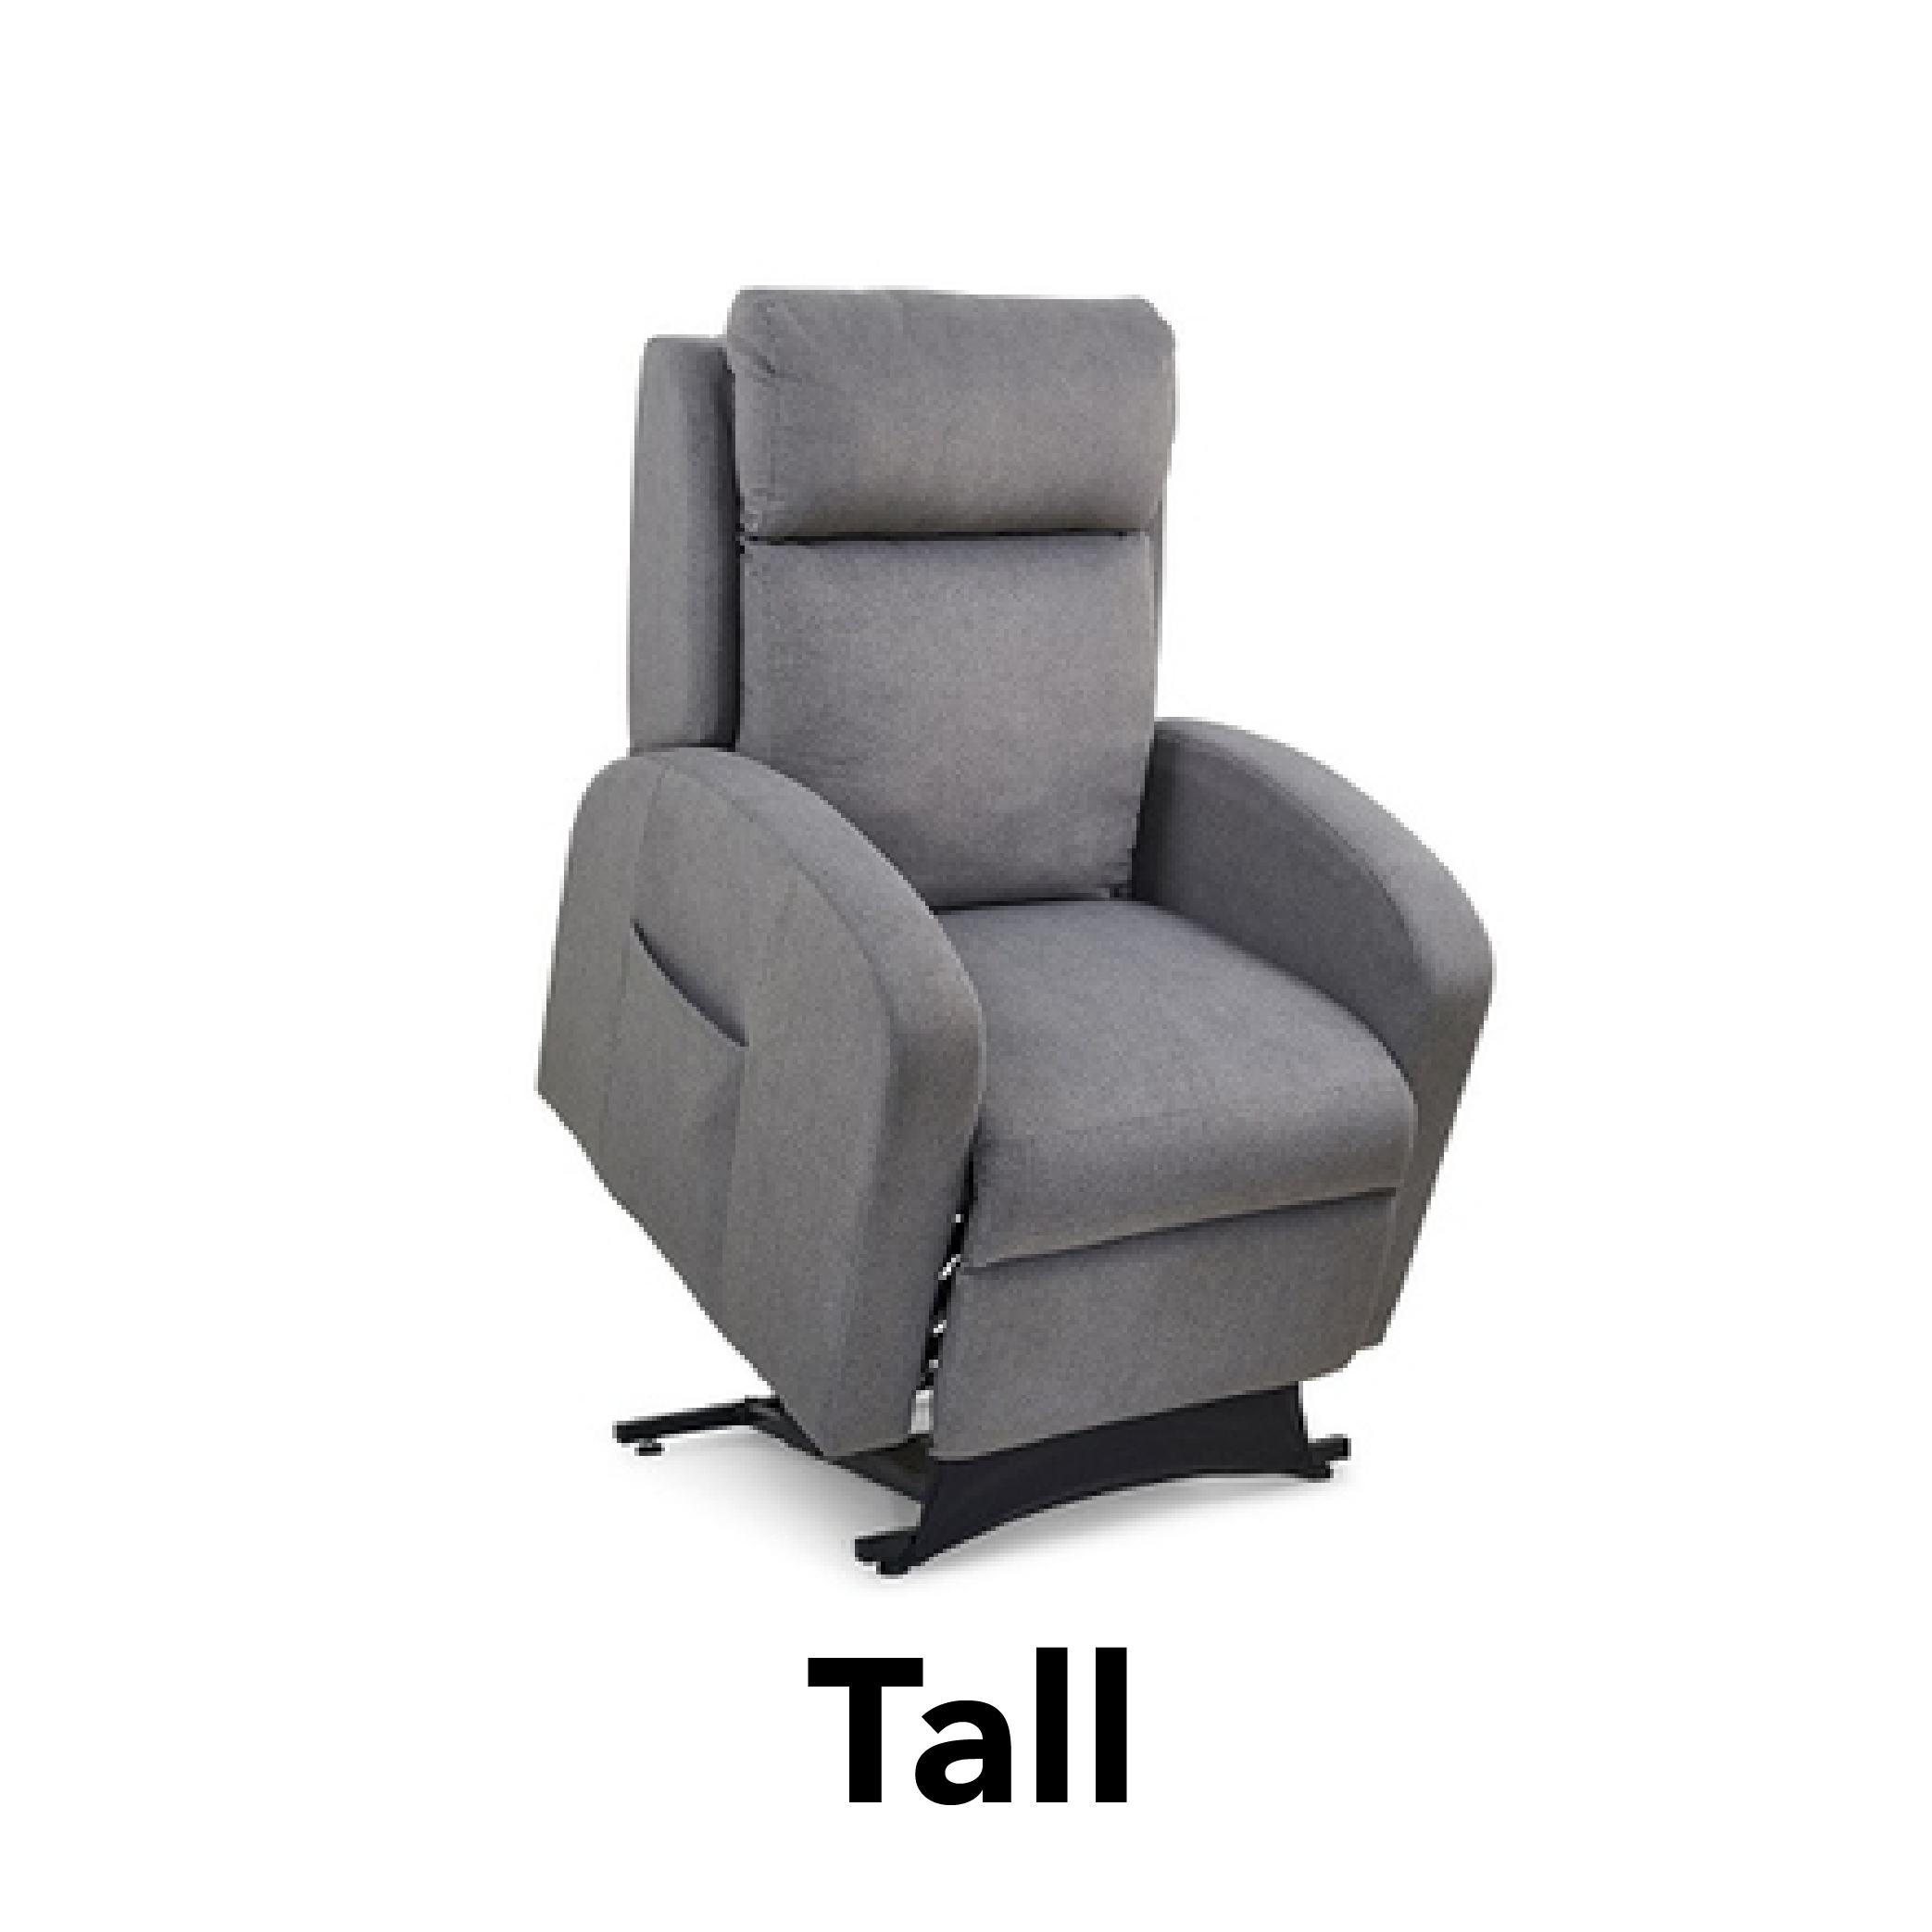 Tall lift chairs category